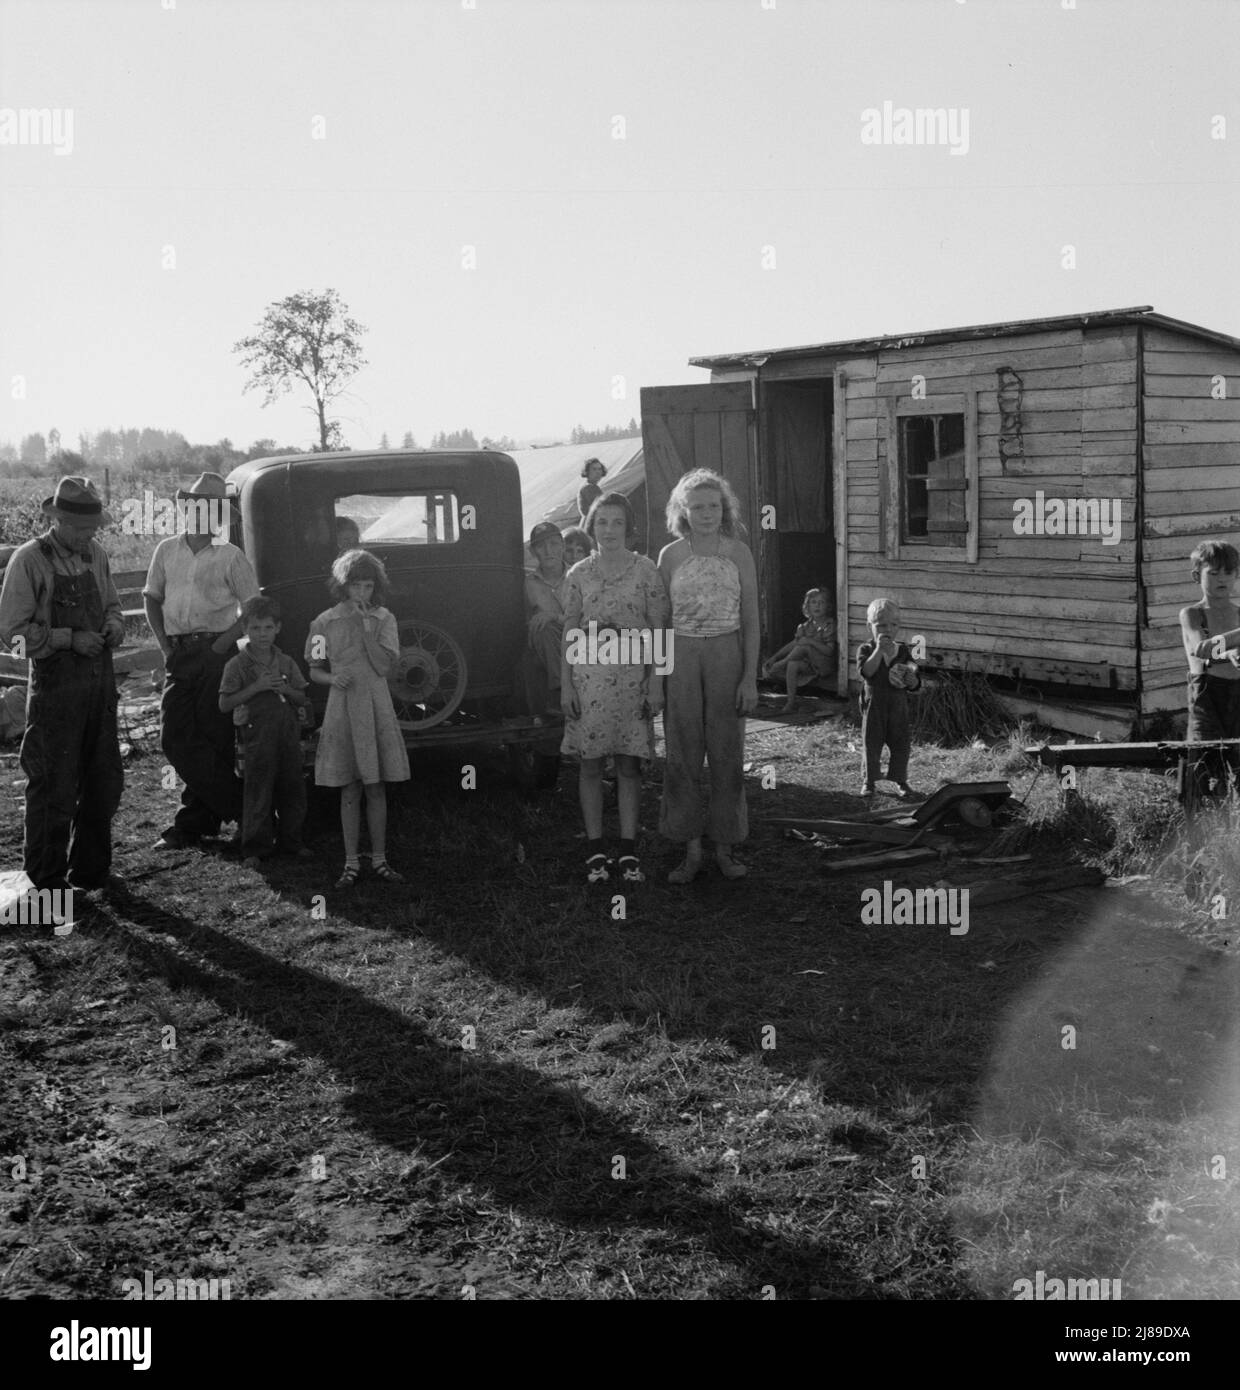 [Untitled, possibly related to: Oregon, Marion County, near West Stayton. Bean pickers' children in camp at end of day]. Stock Photo